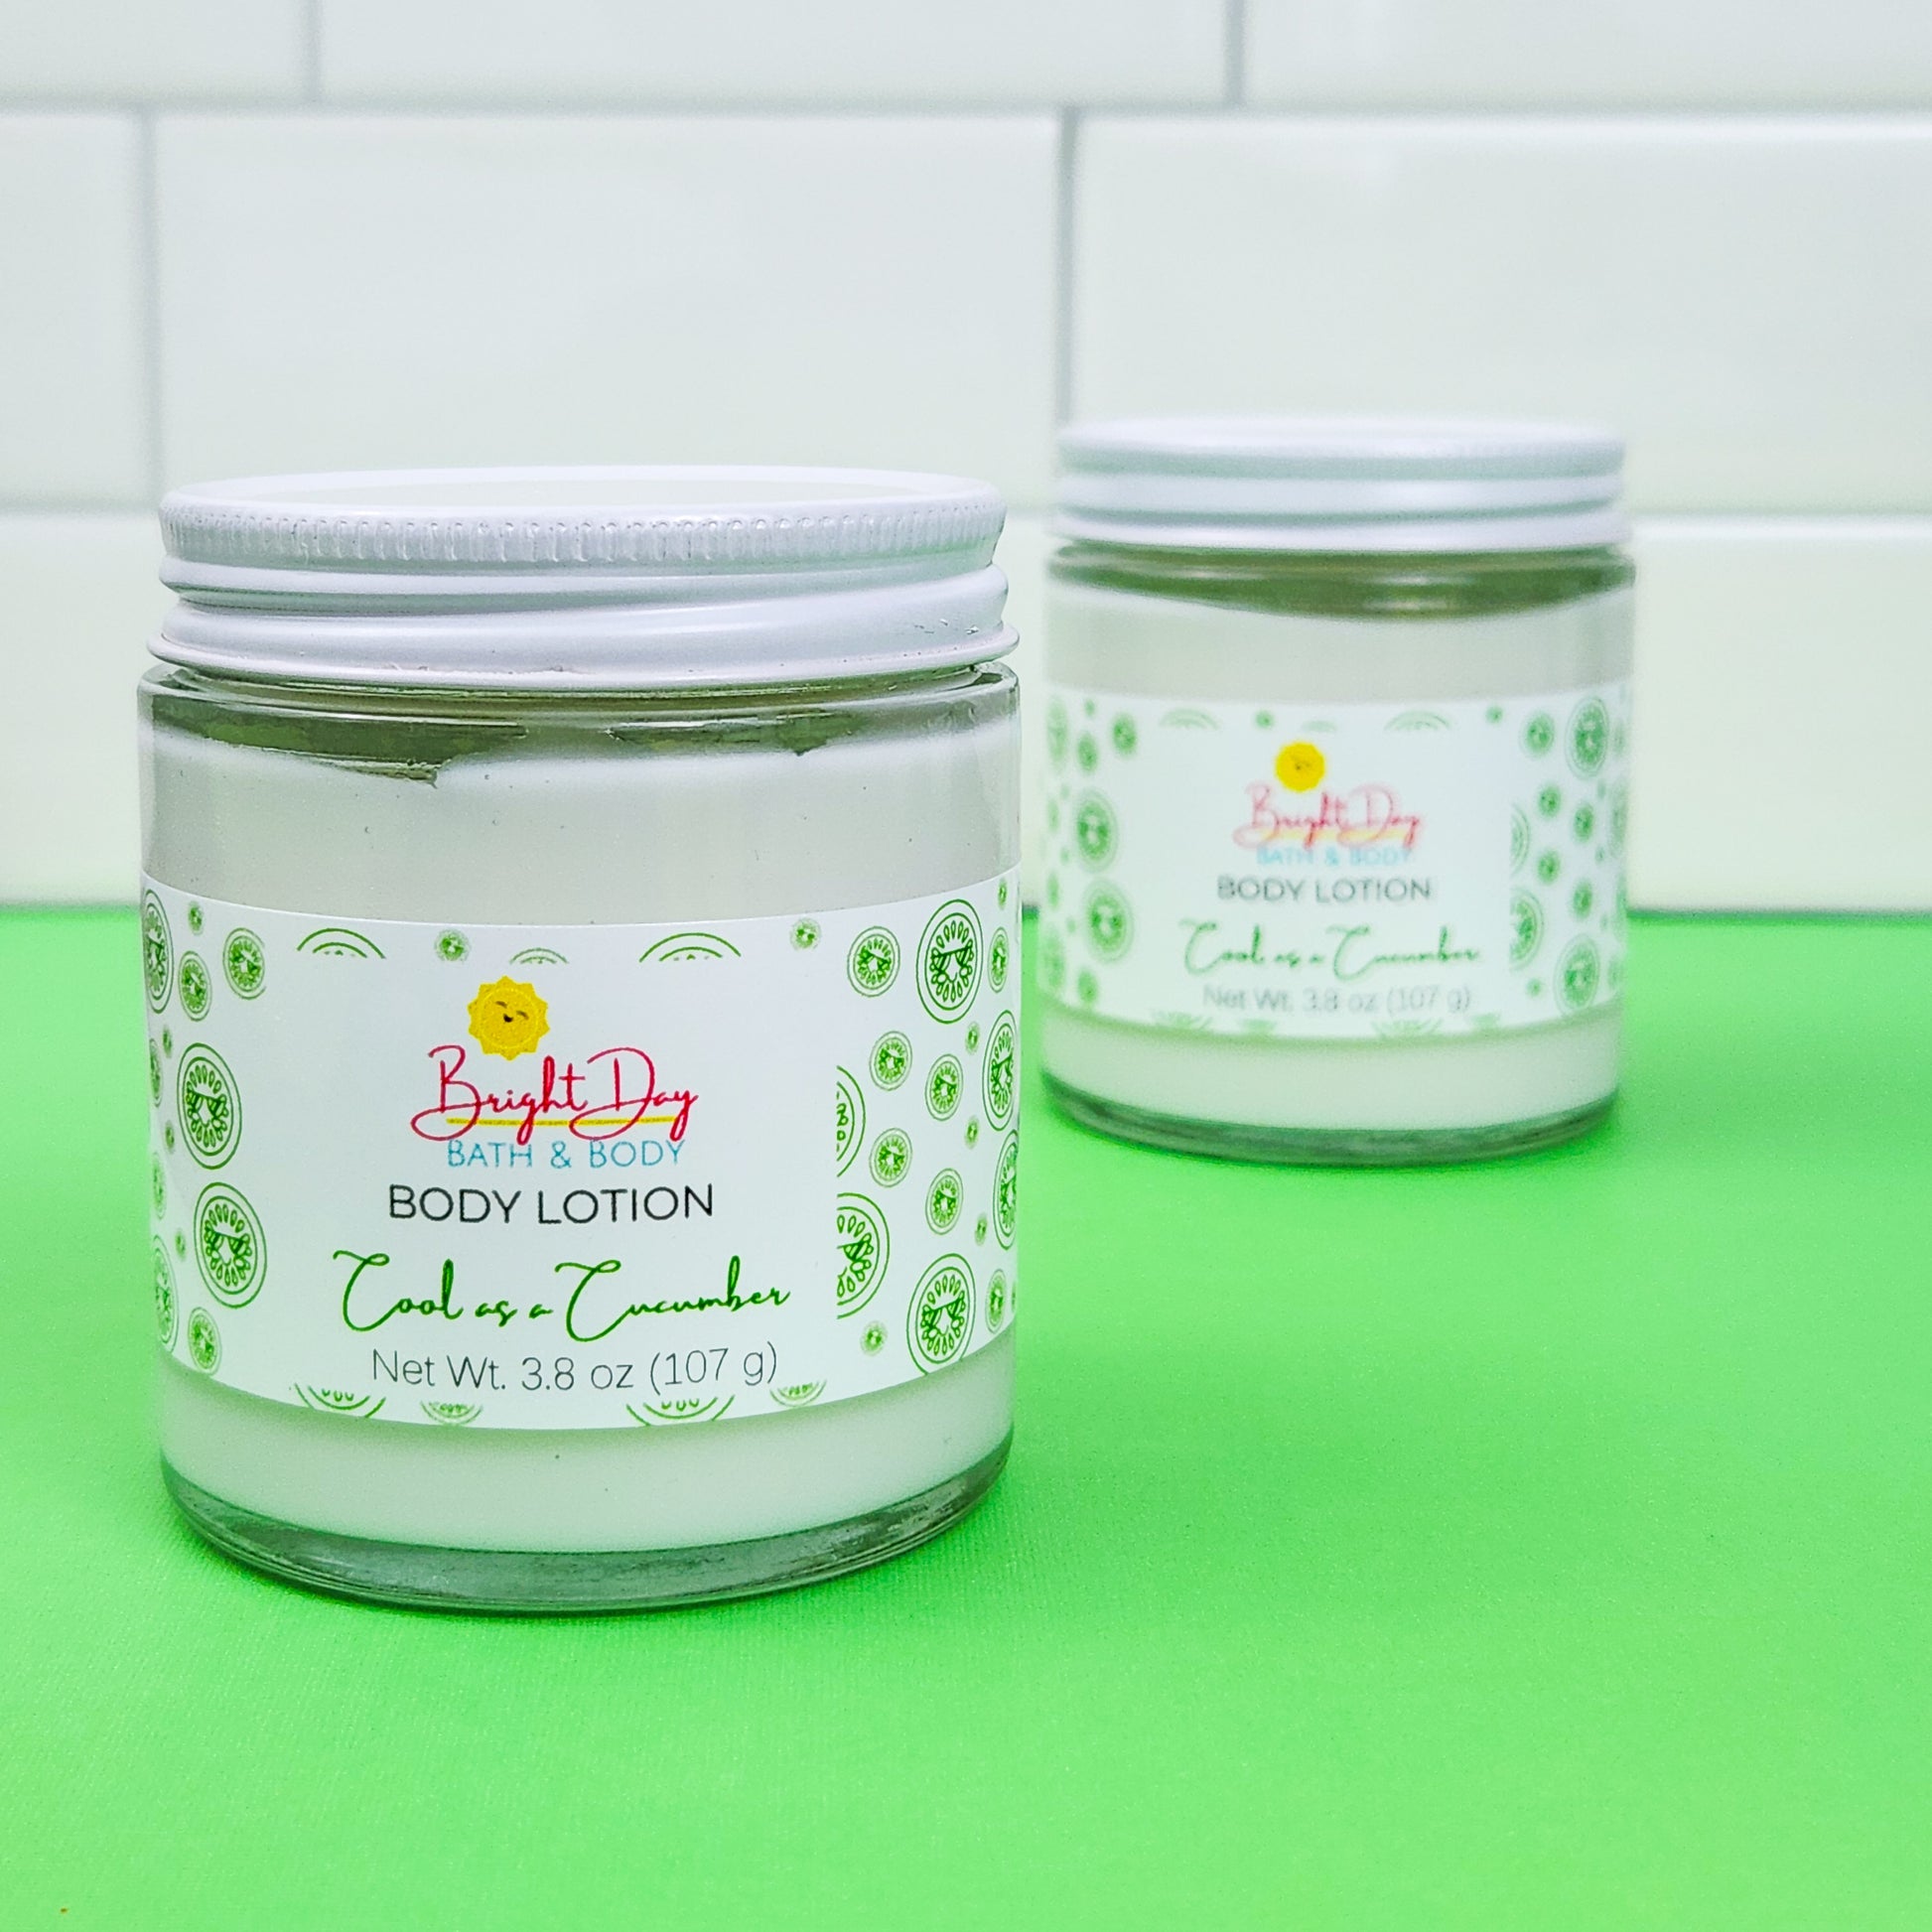 Two jars of Cool as a Cucumber Body Lotion, on a green and white background.